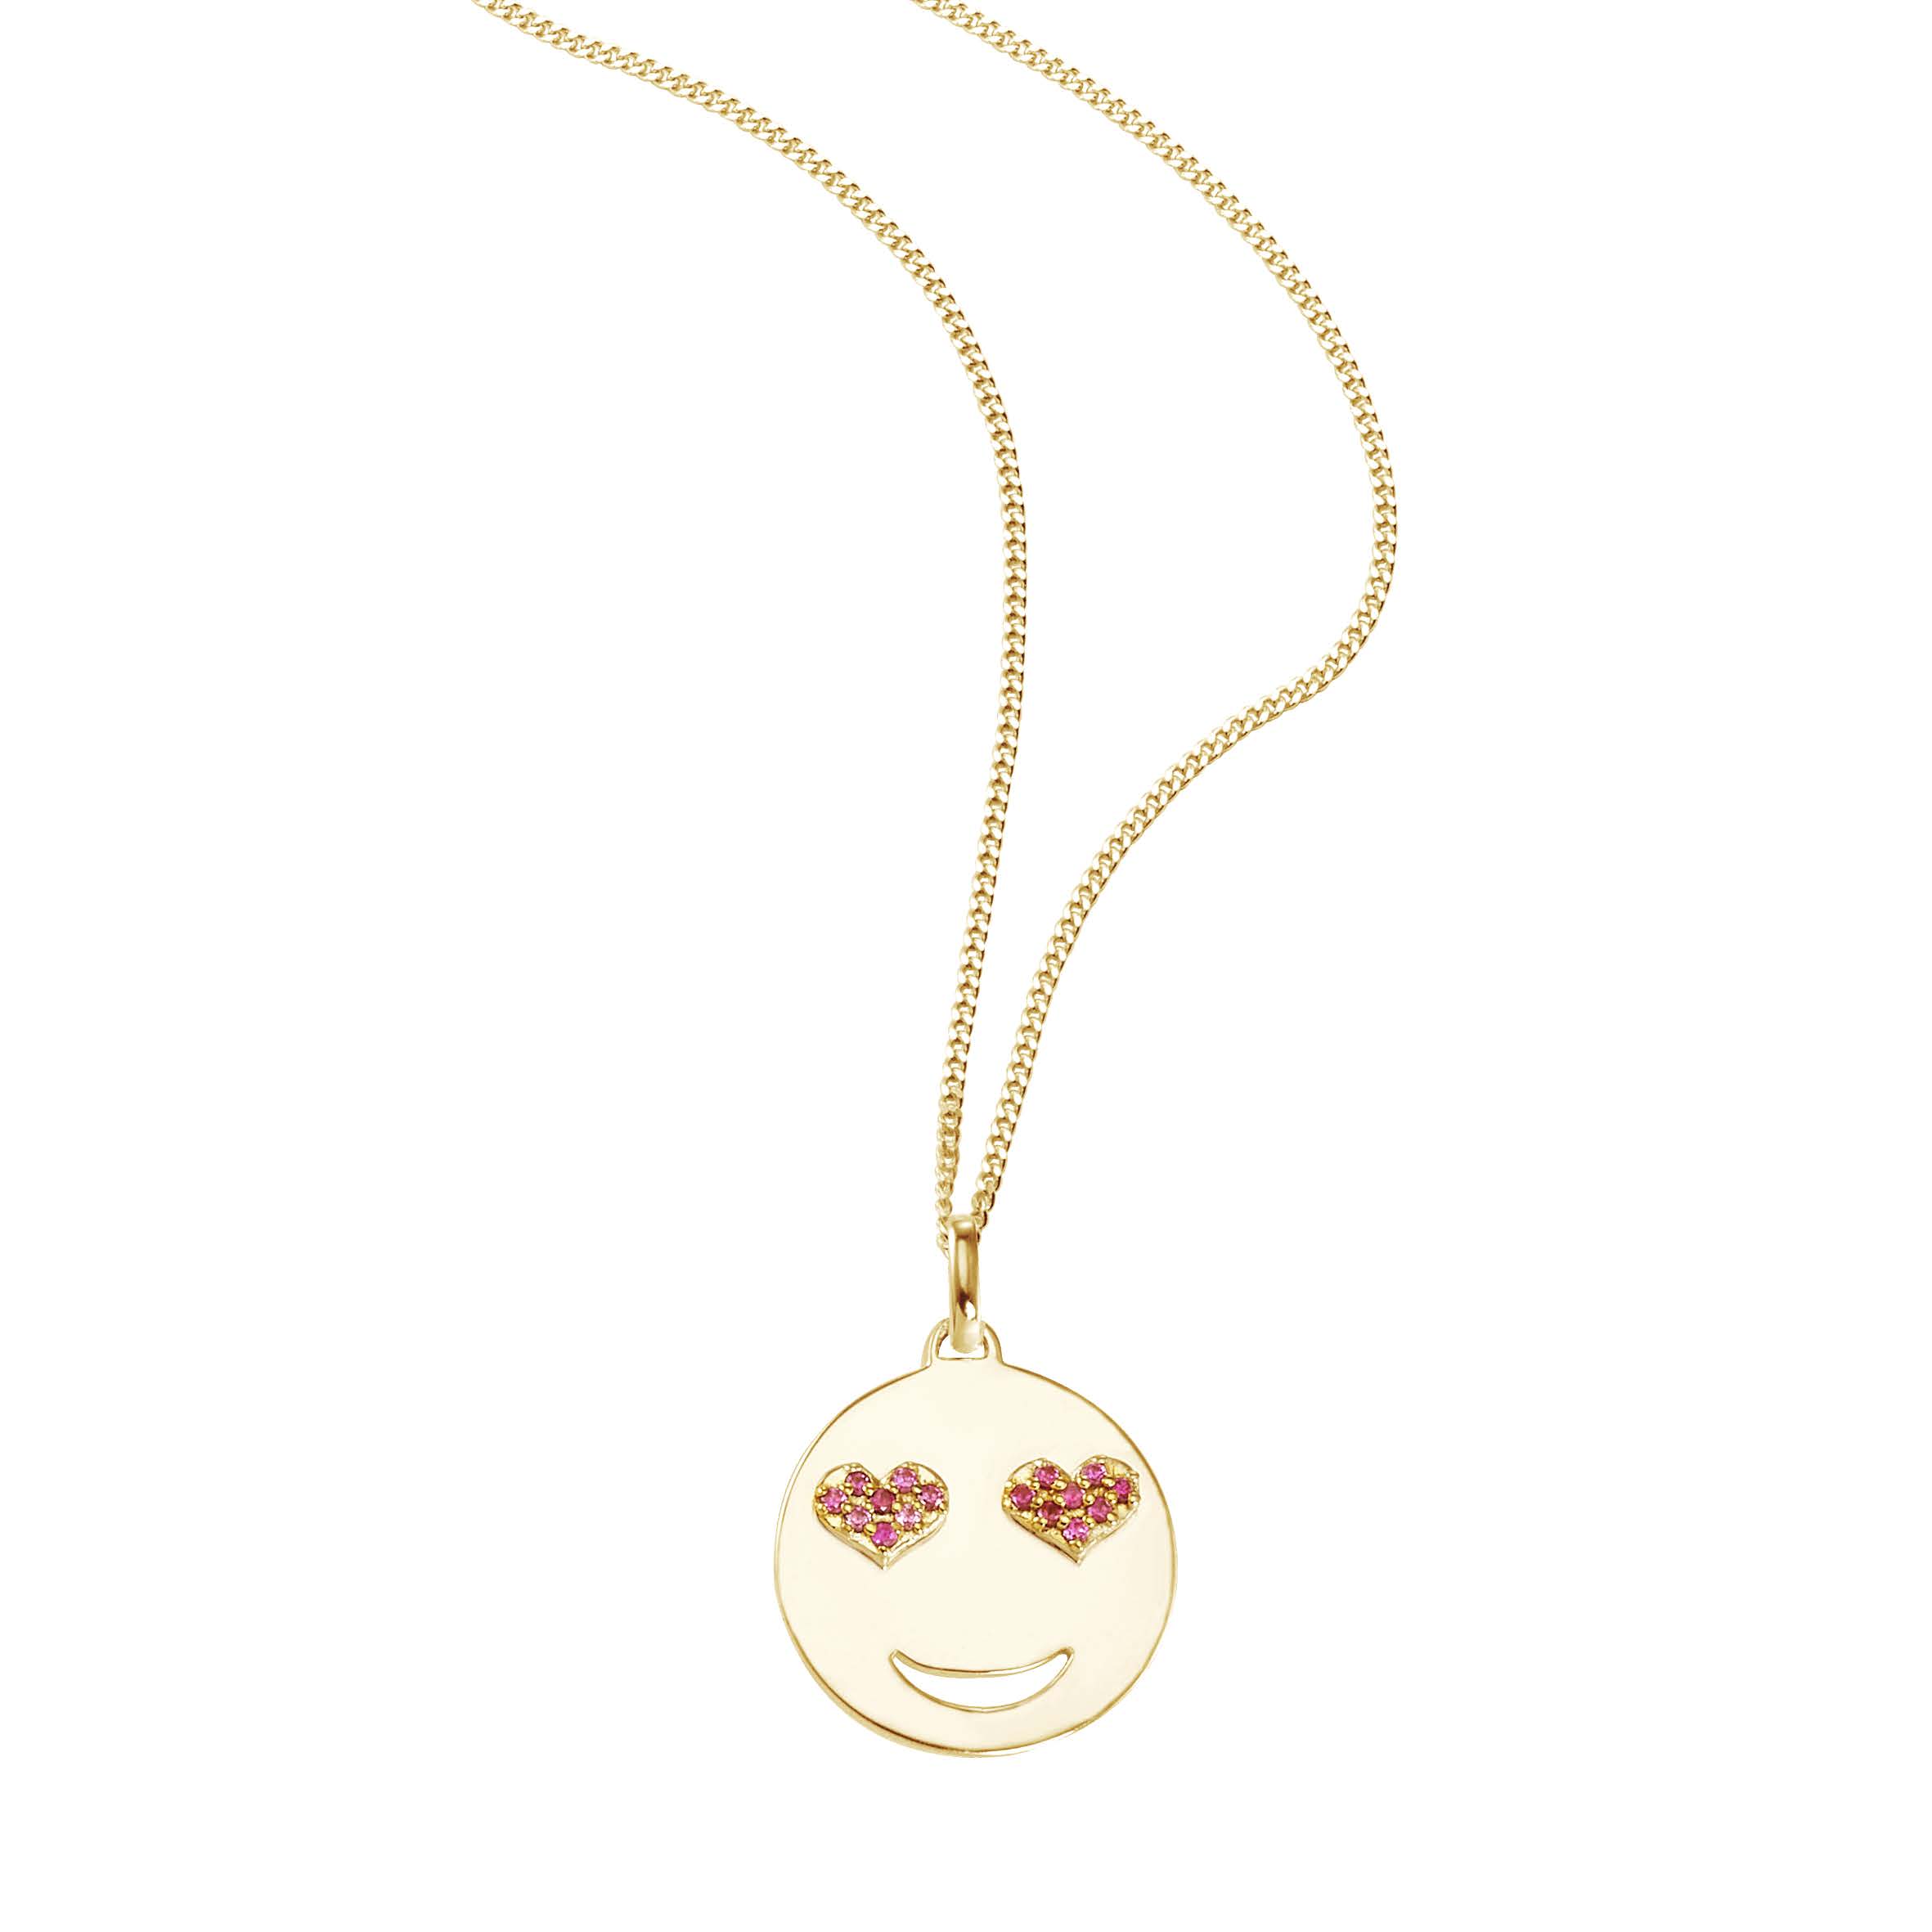 SO COSI_All You Need is Love Necklace_Sterlingsilber goldplattiert_89 Euro